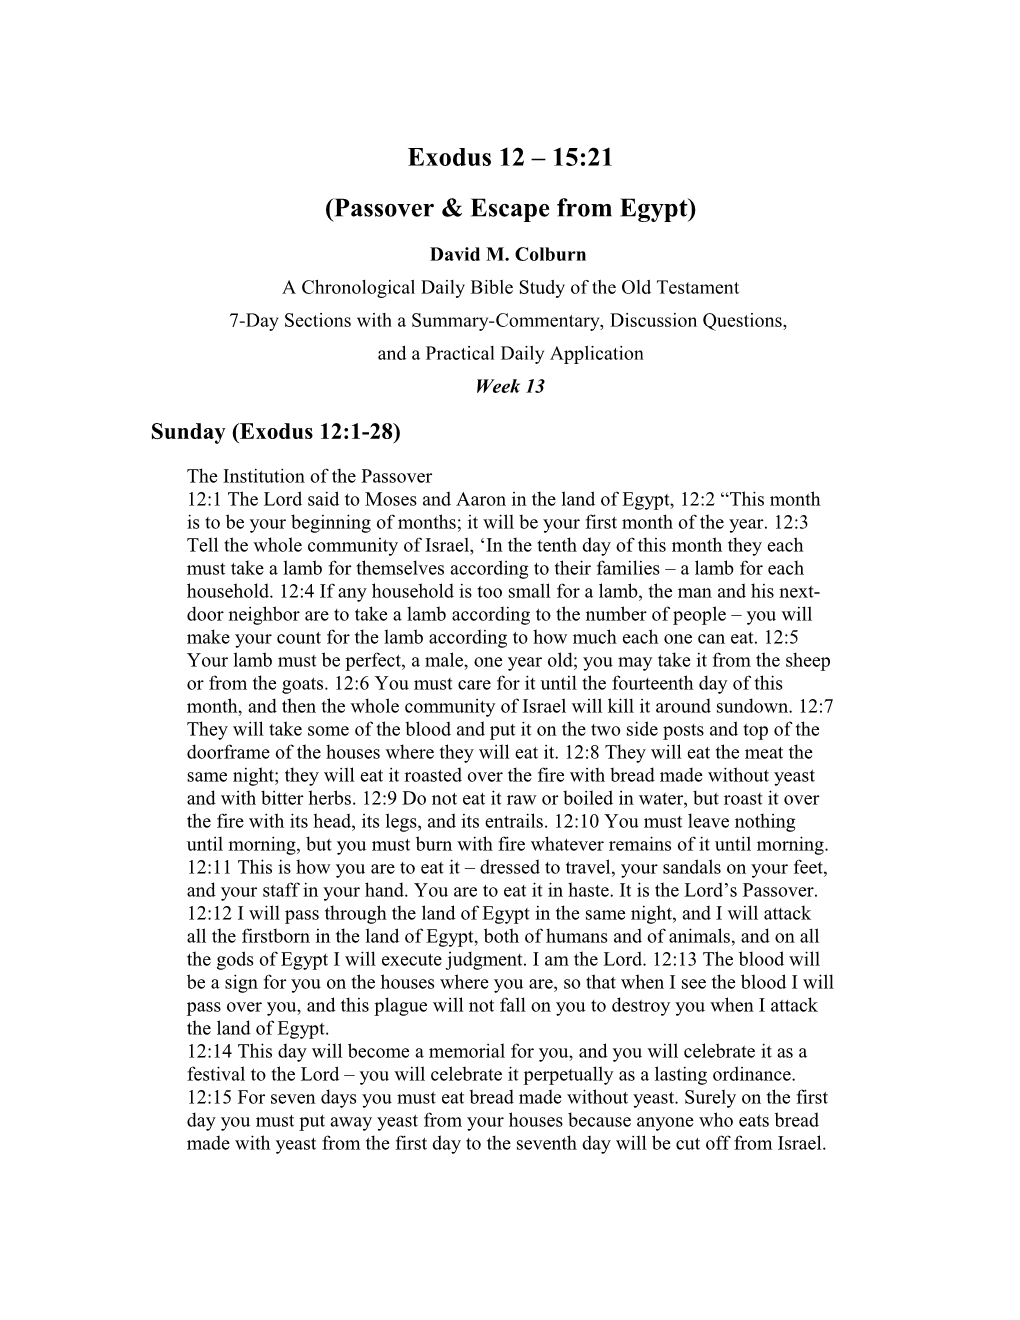 Passover & Escape from Egypt